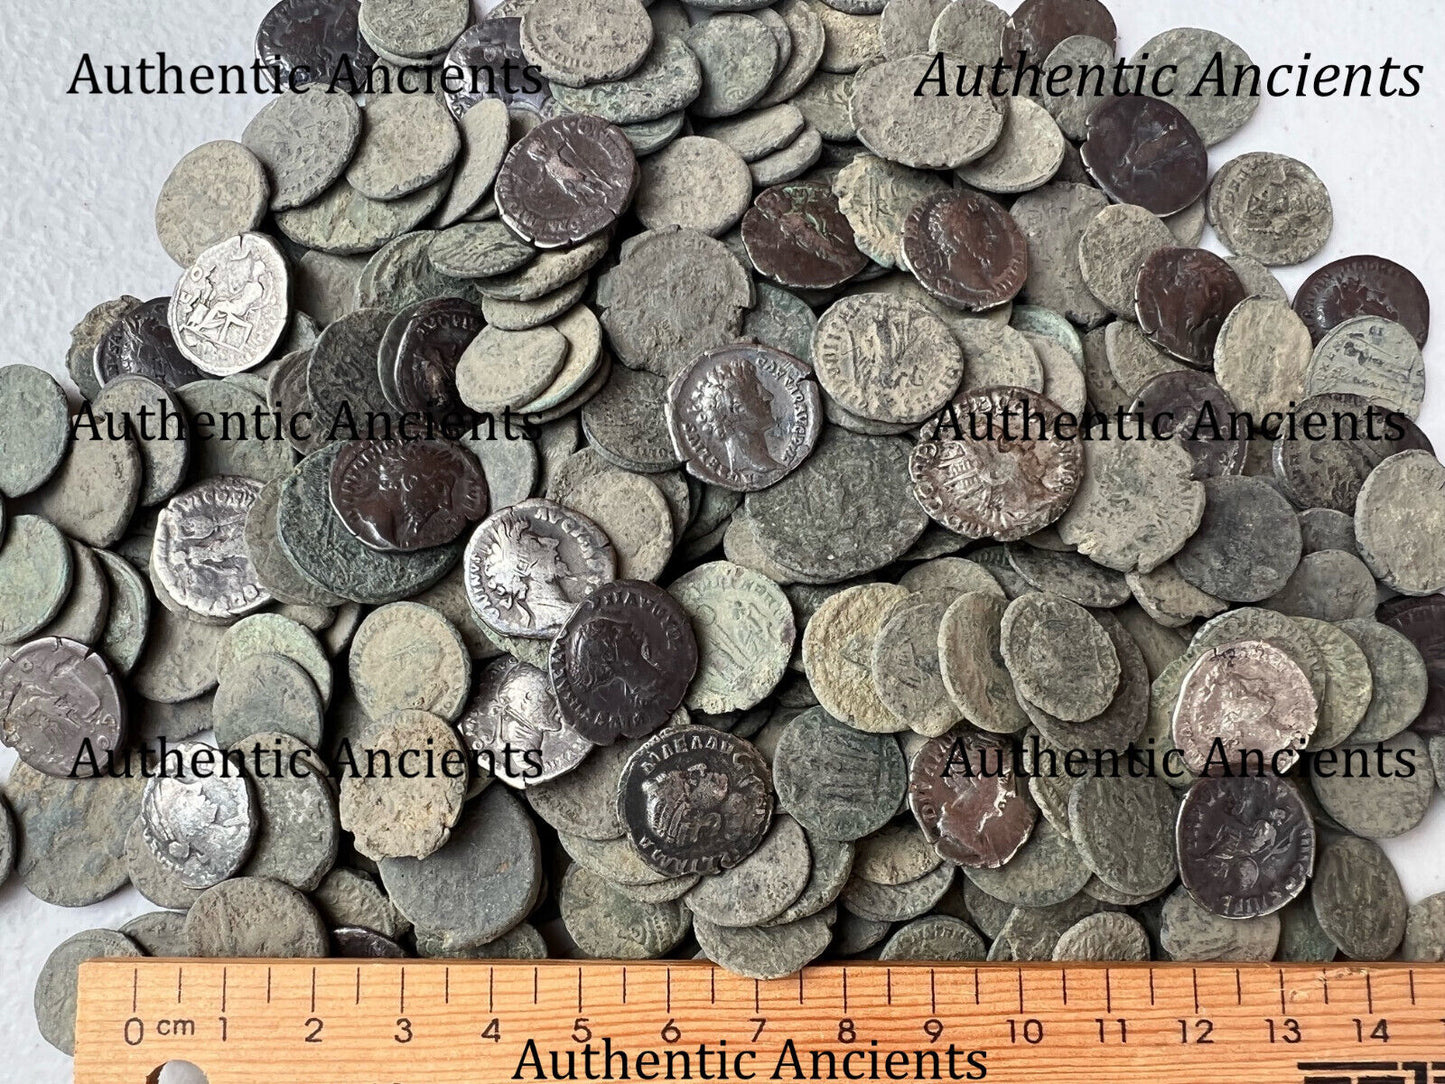 10x Uncleaned Ancient Roman Coins (Silver coin included) + Cleaning Tool